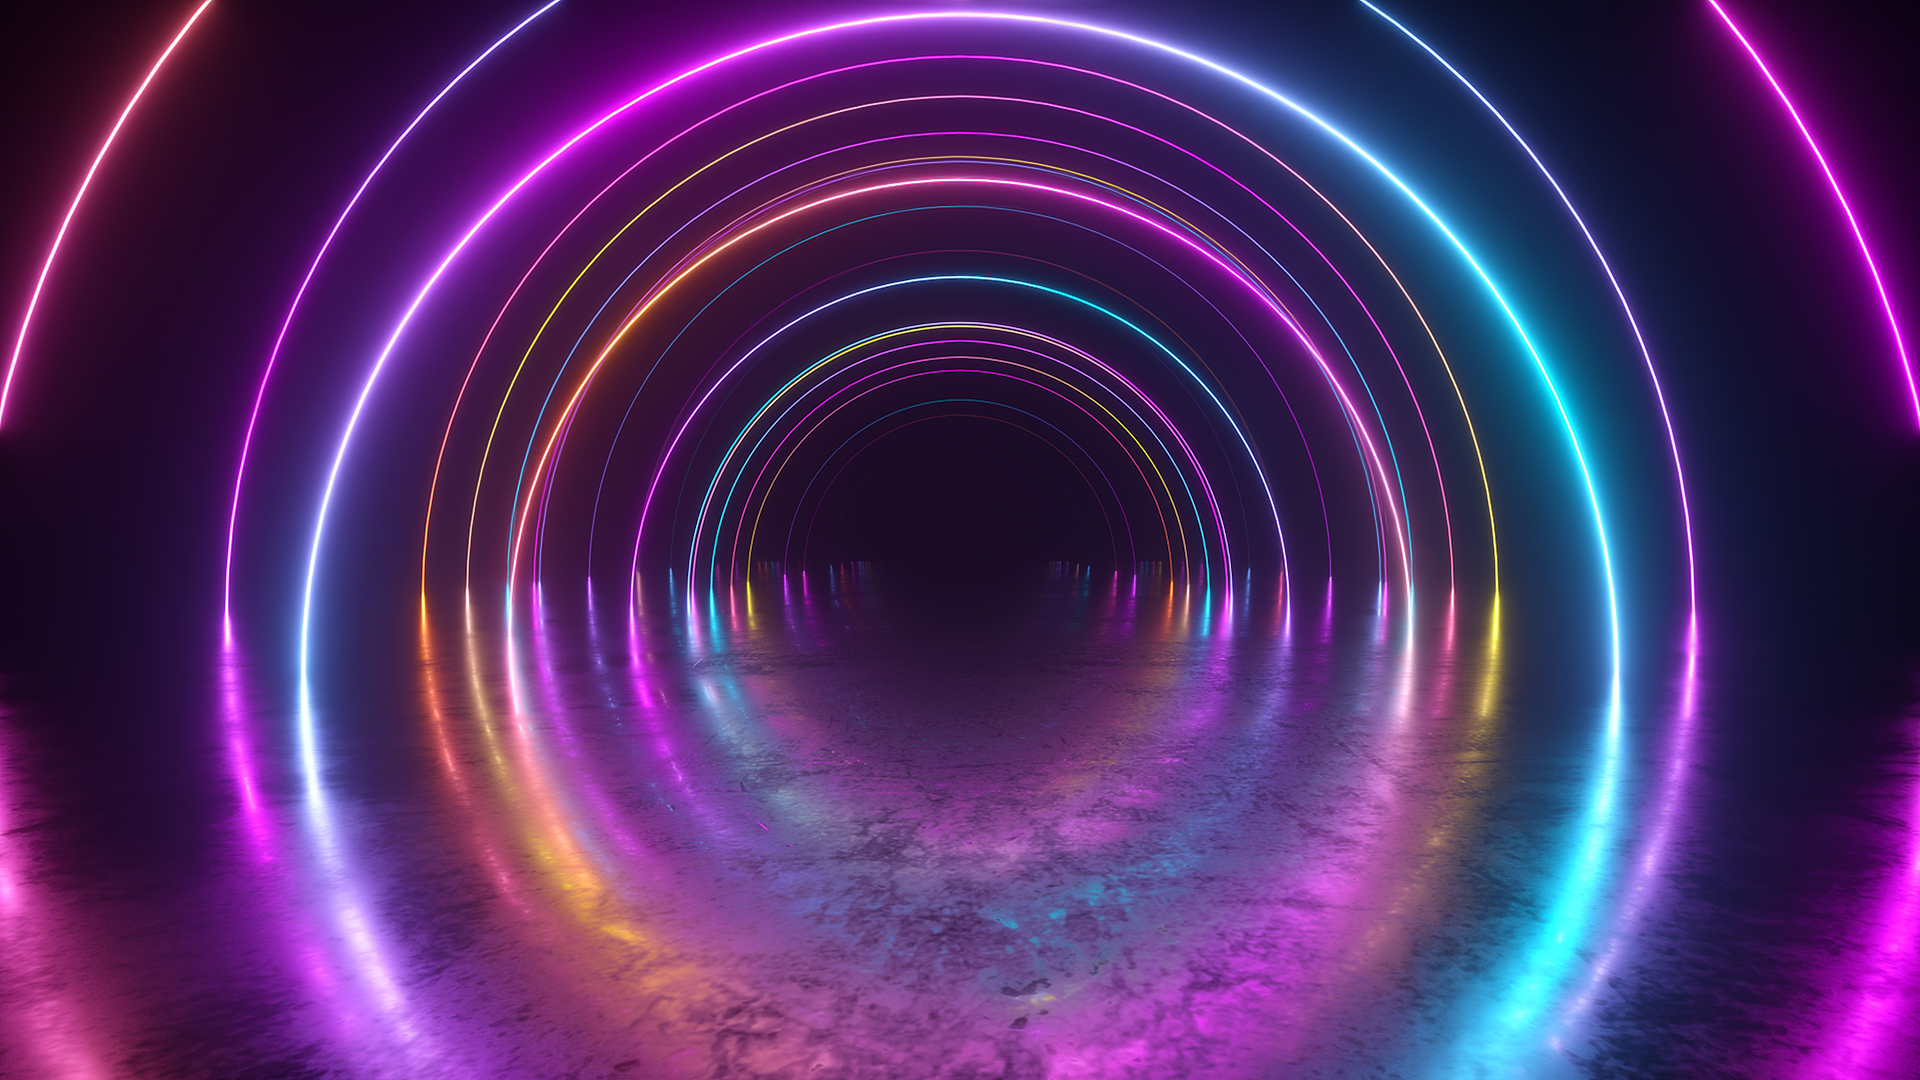 Infinity flight inside tunnel, neon light abstract background, round arcade, portal, rings, circles, virtual reality, ultraviolet spectrum, laser show, metal floor reflection. 3d illustration